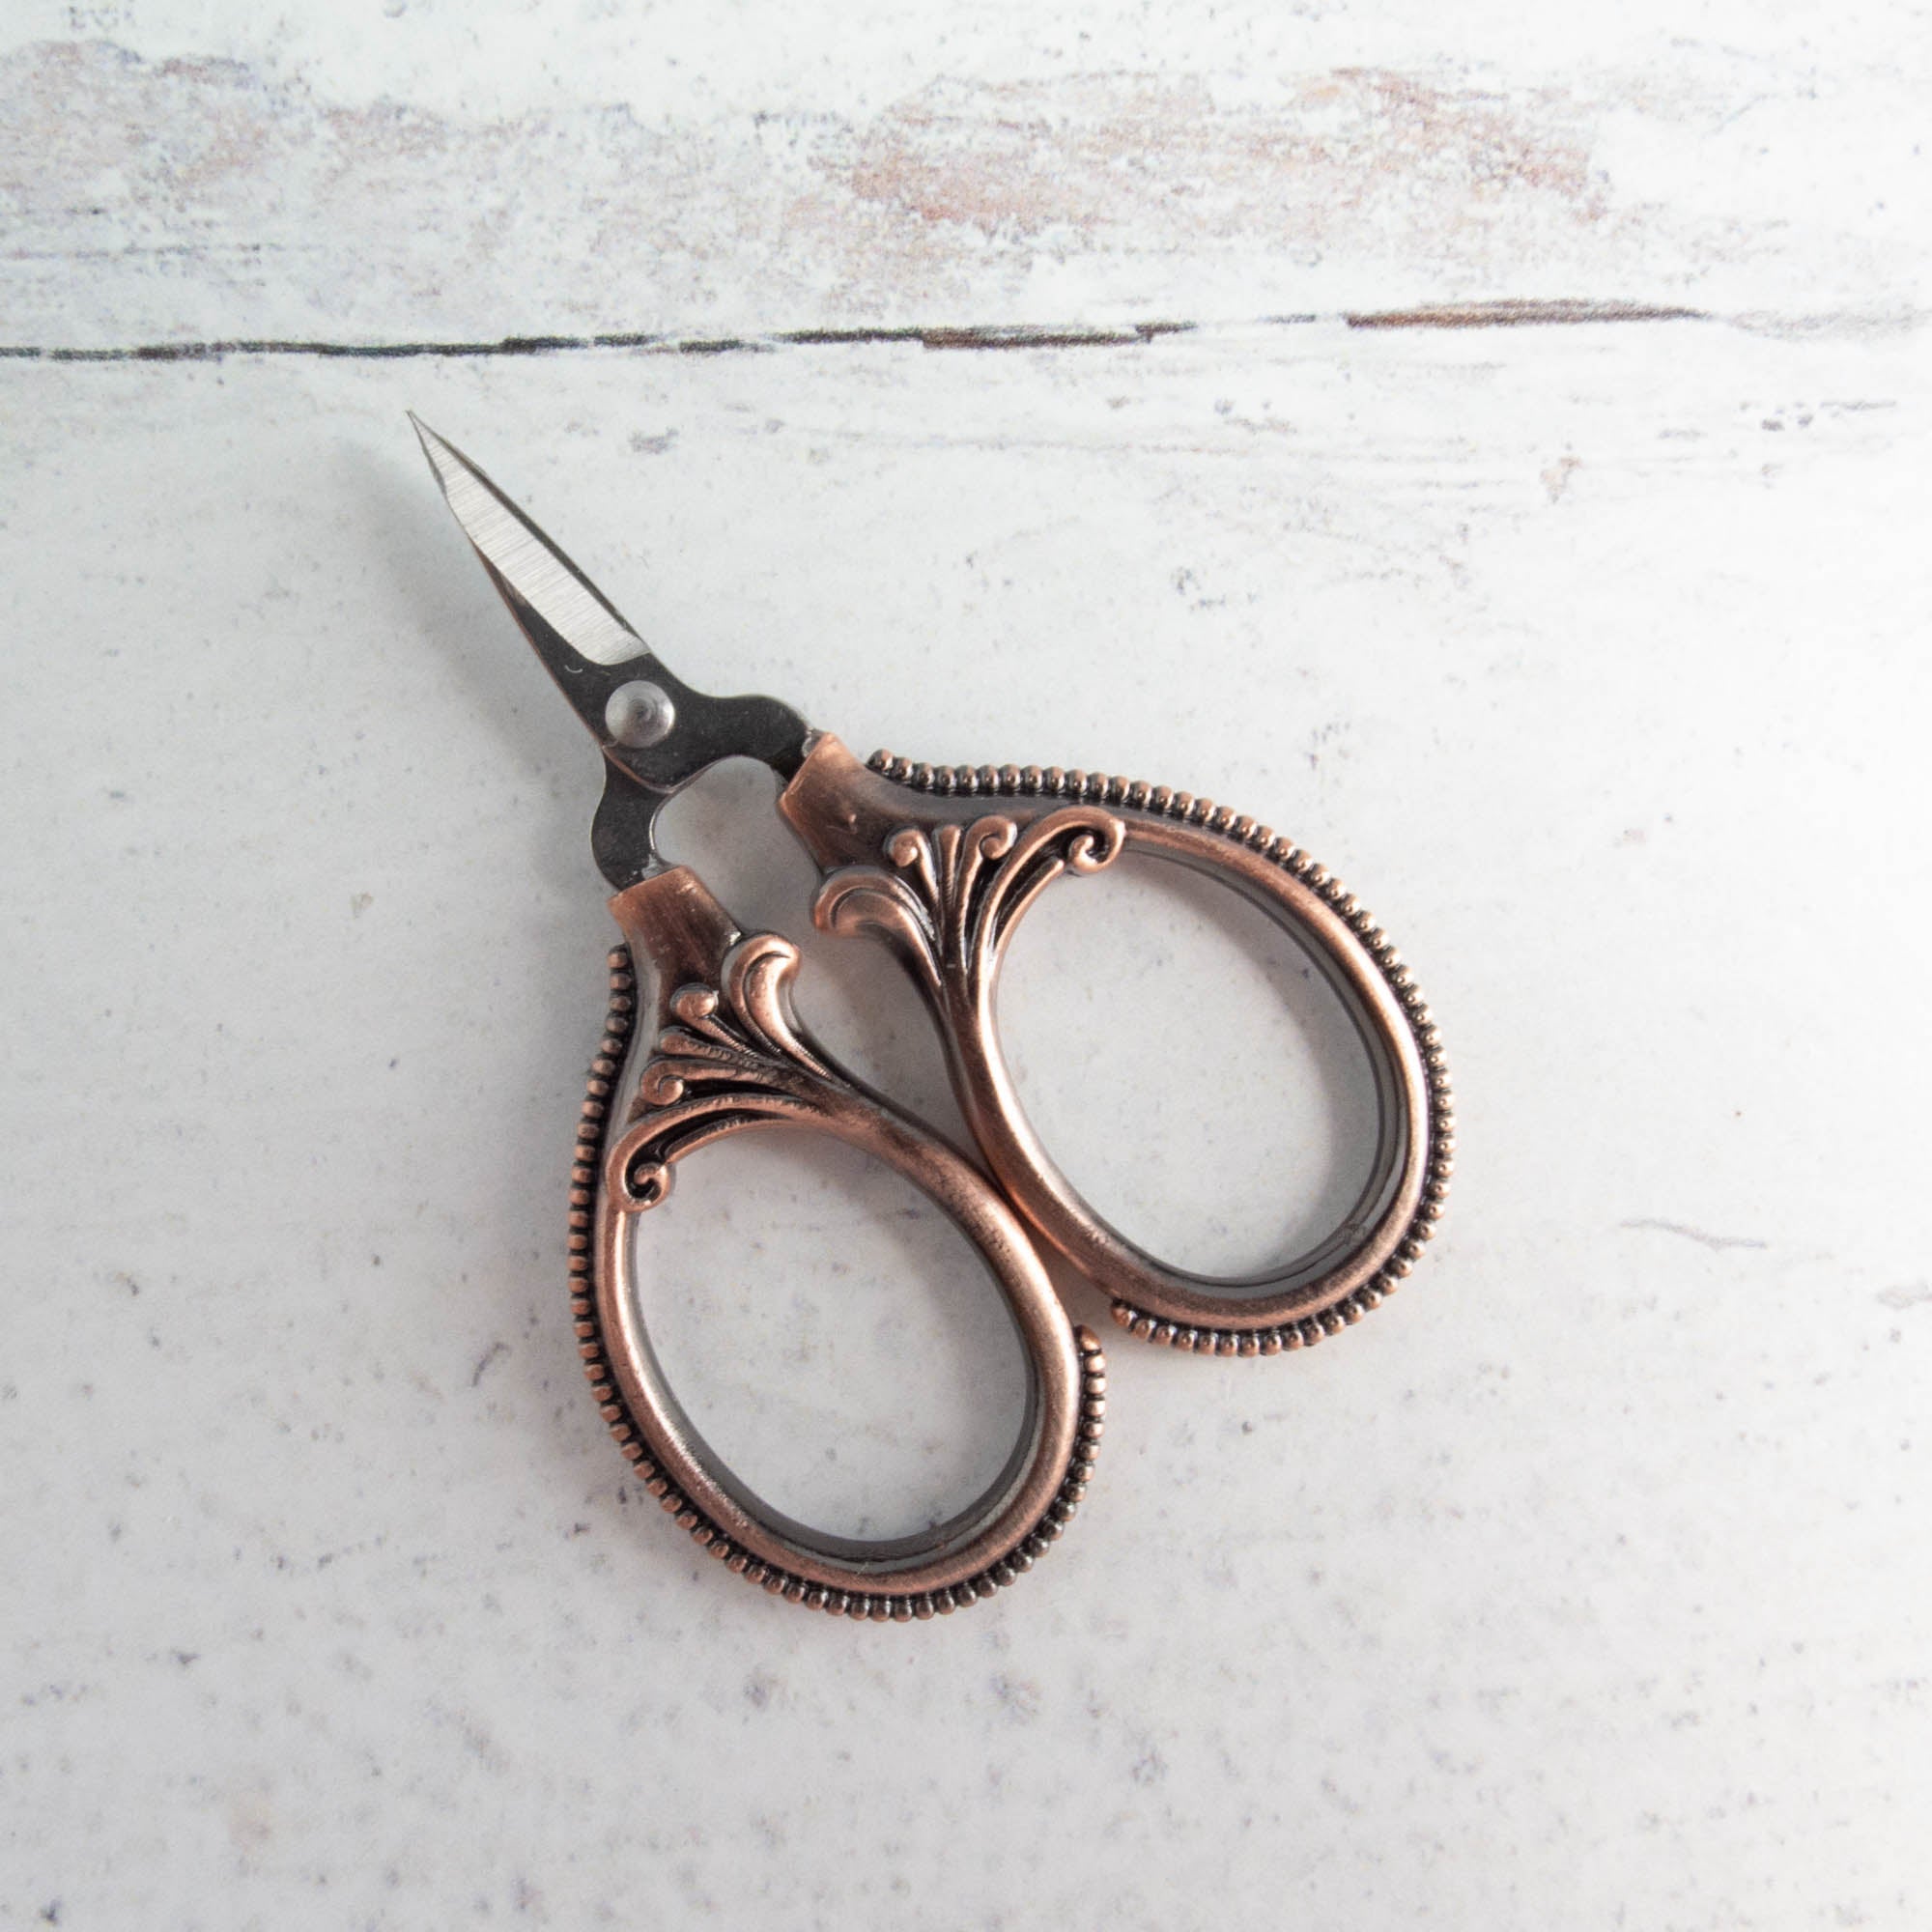 Embroidery Scissors Thread Snips, Sewing Scissors, Knitting